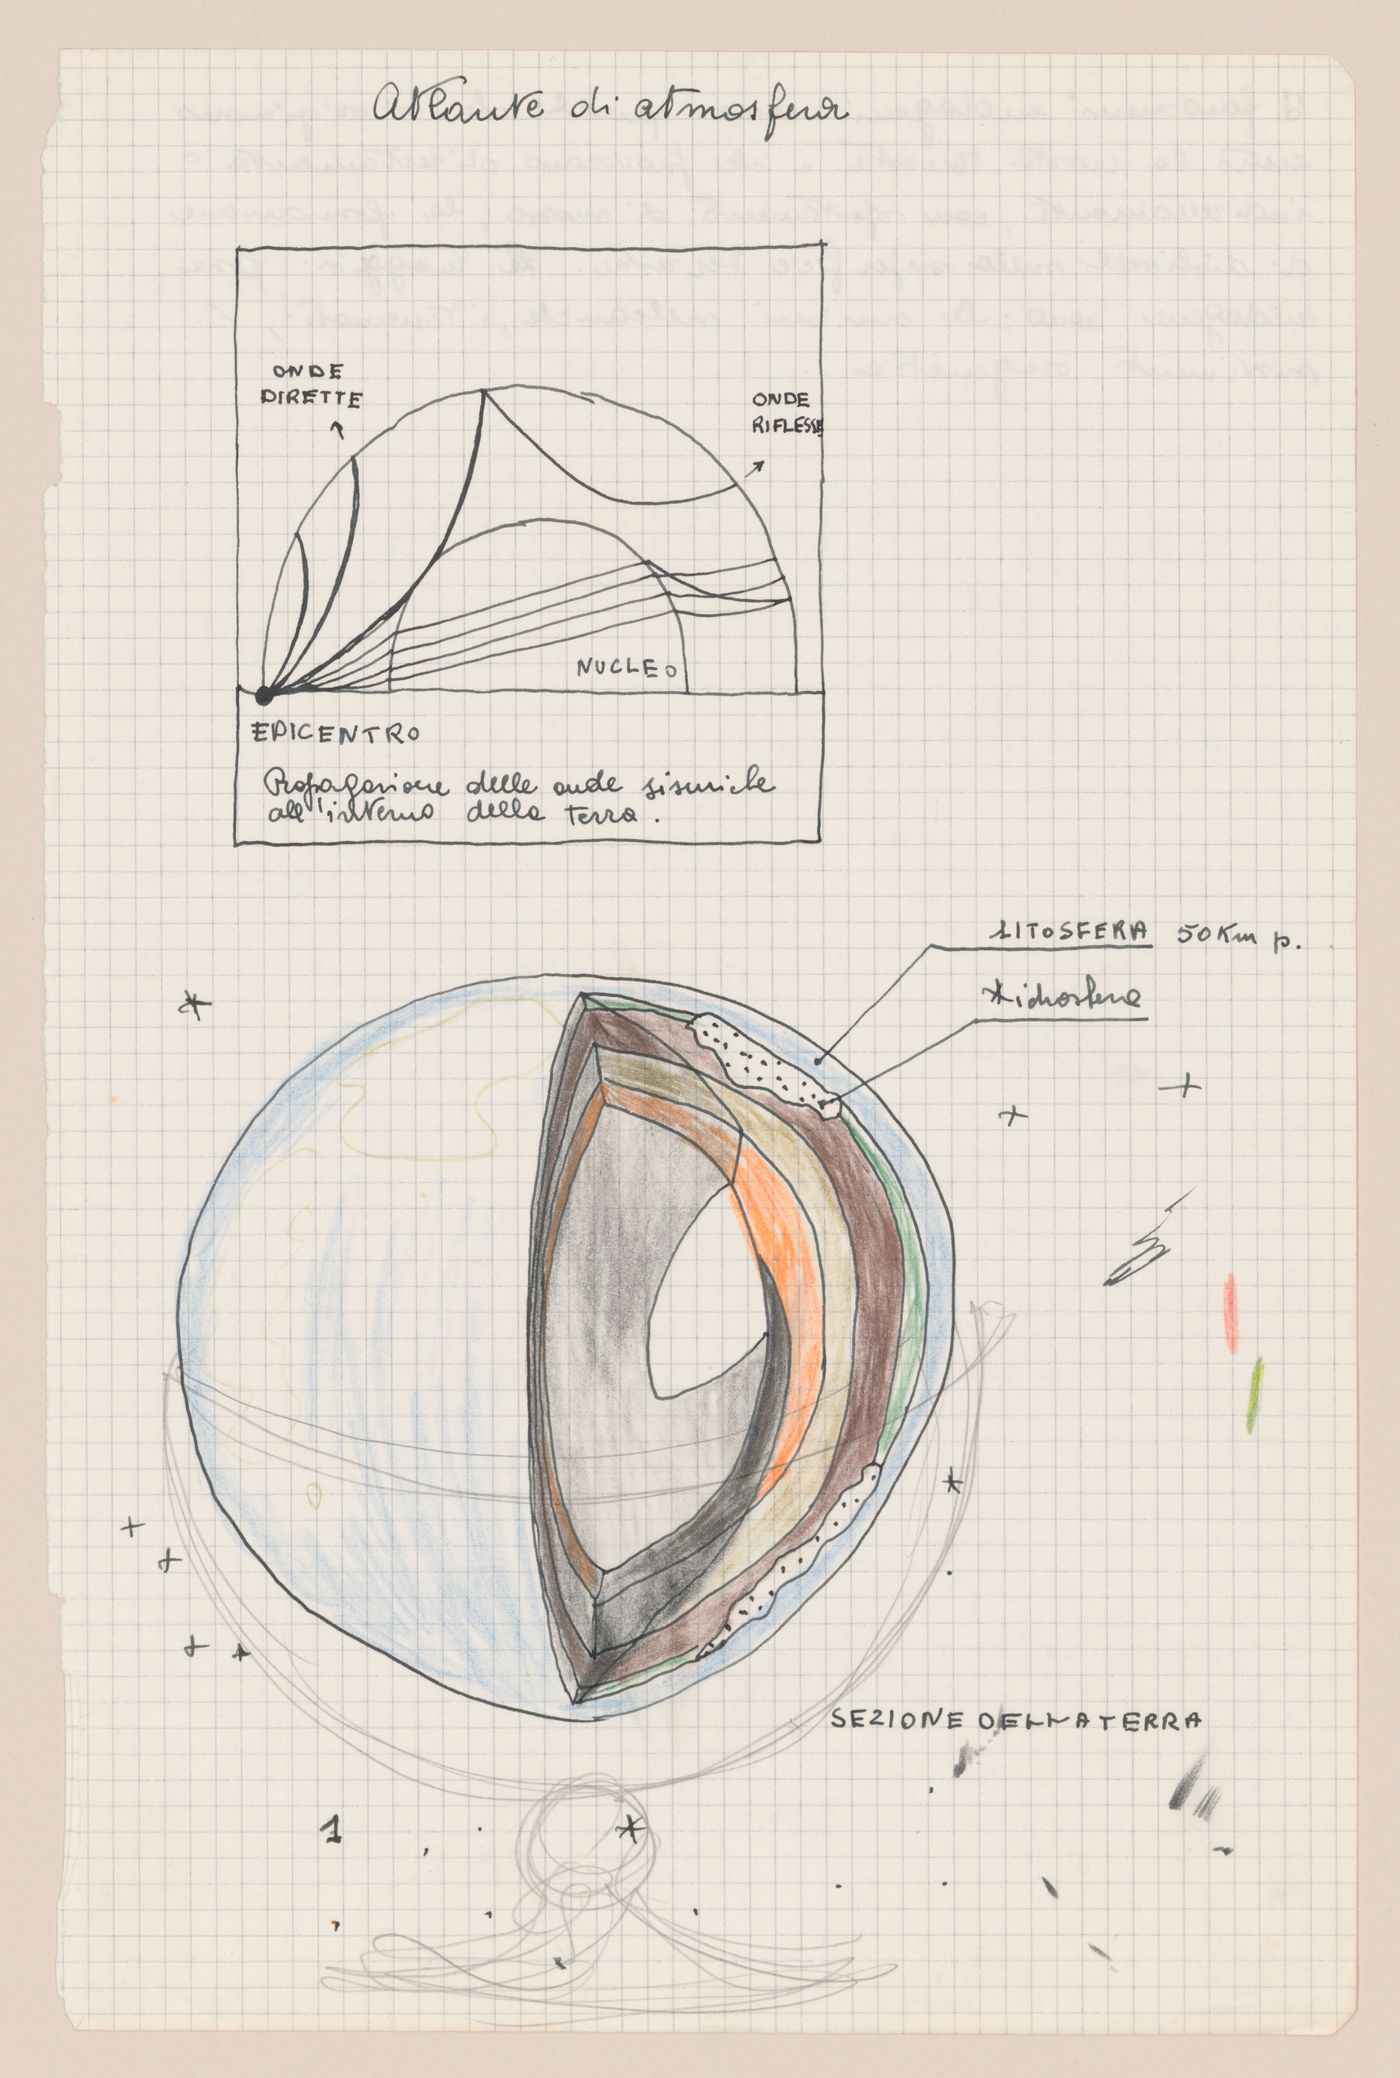 Sketches for Architettura Interplanetaria [Interplanetary Architecture] with notes on verso